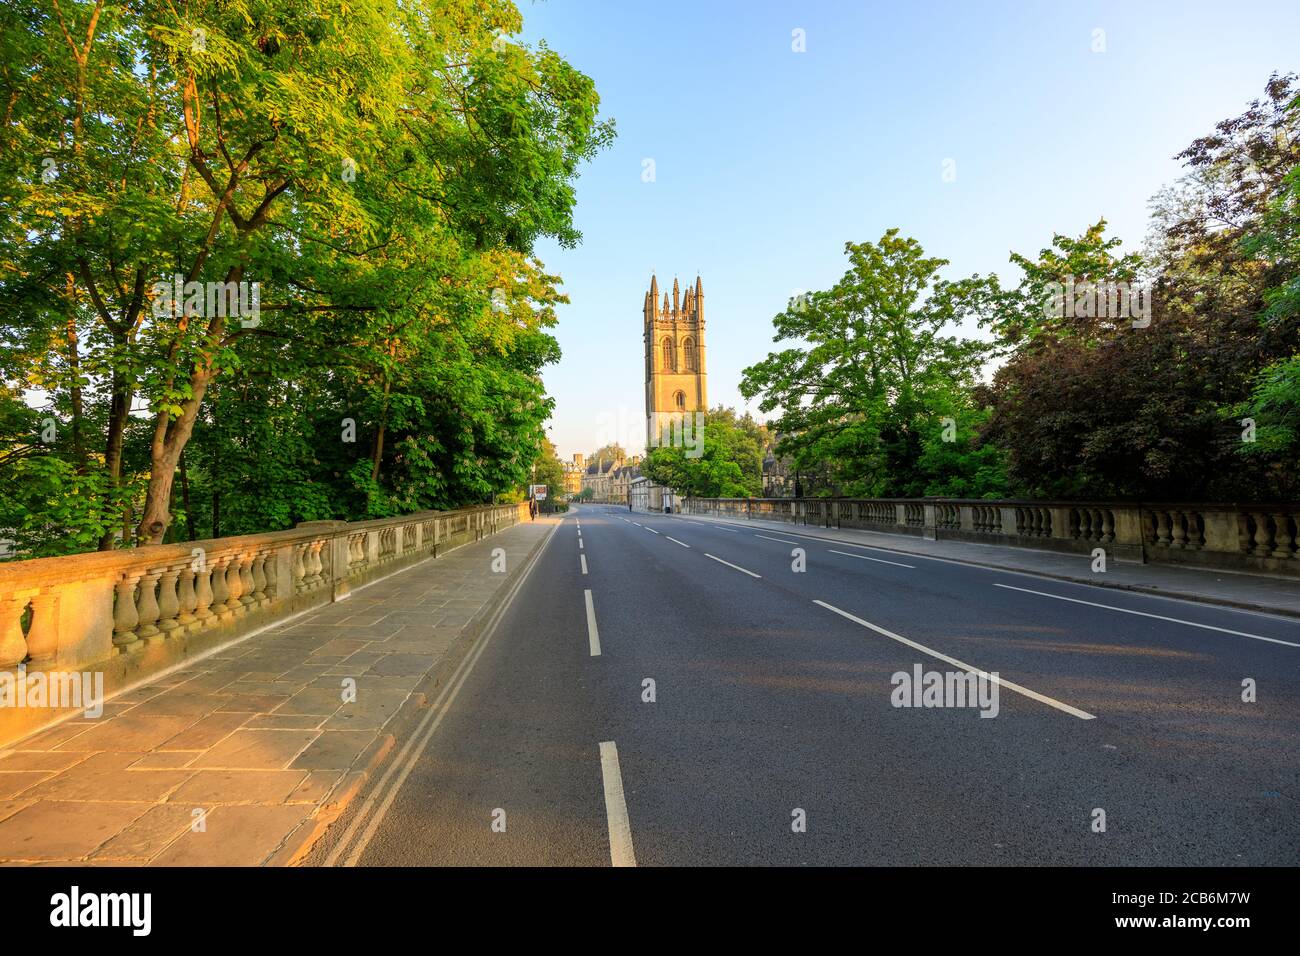 Magdalen Bridge and Magdalen Tower in Oxford at sunrise with no people around, early in the morning on a clear day with blue sky. Oxford, England, UK. Stock Photo